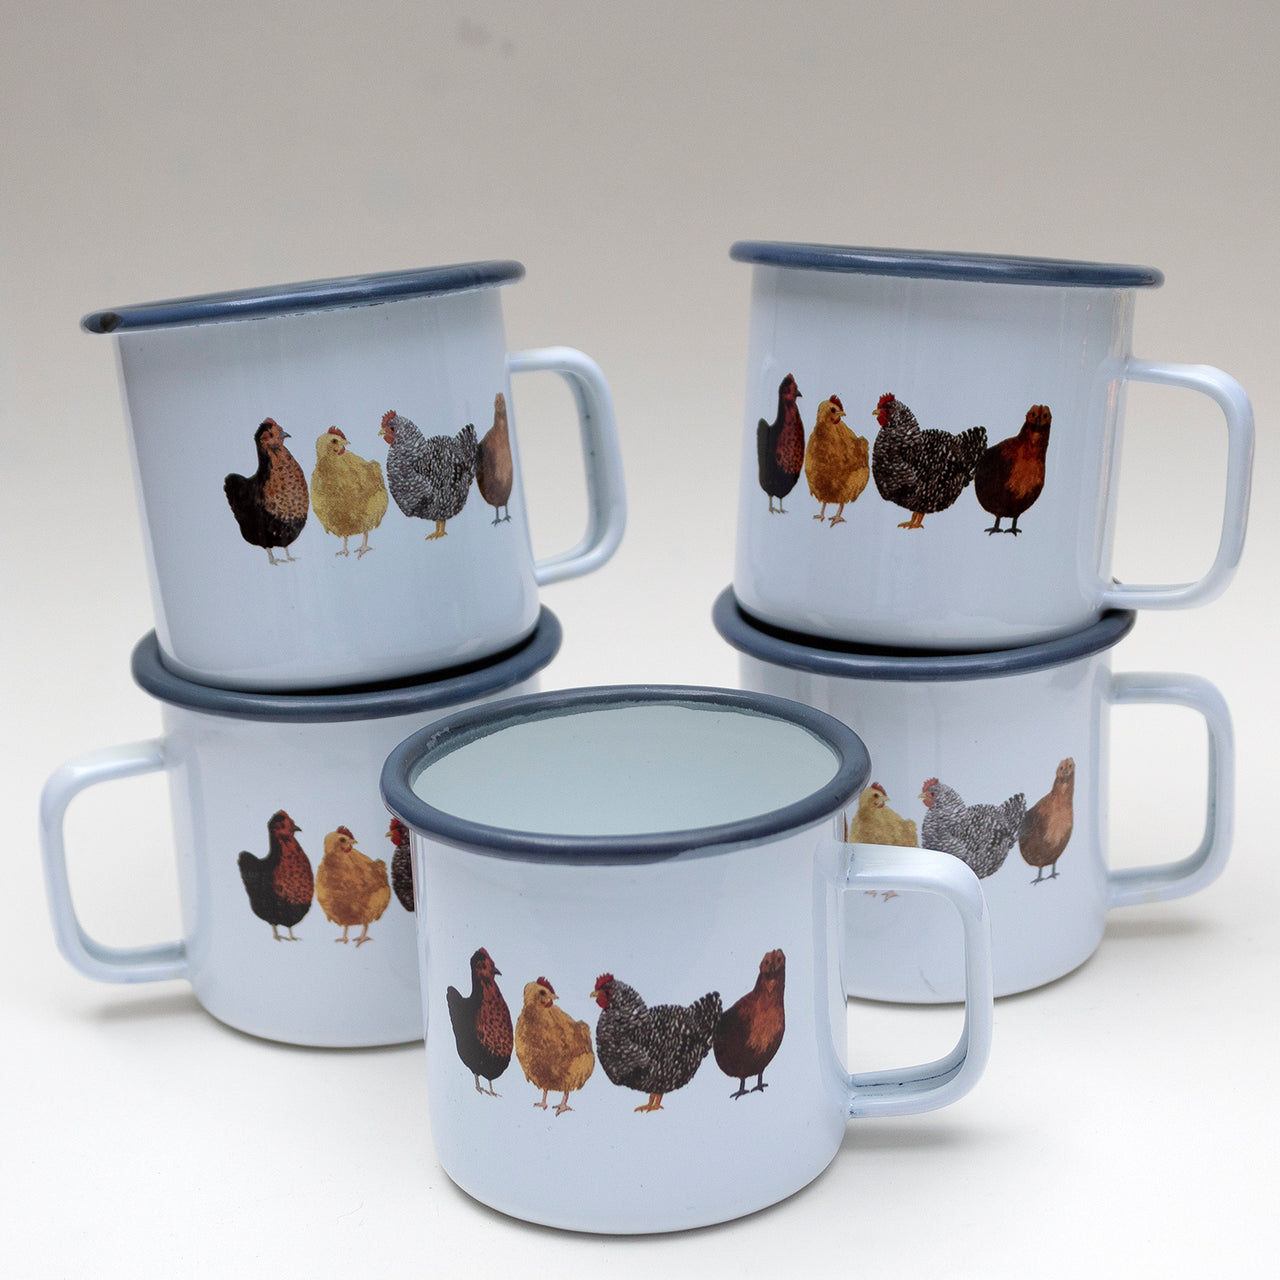 imperfect chicken camp mugs stacked in group